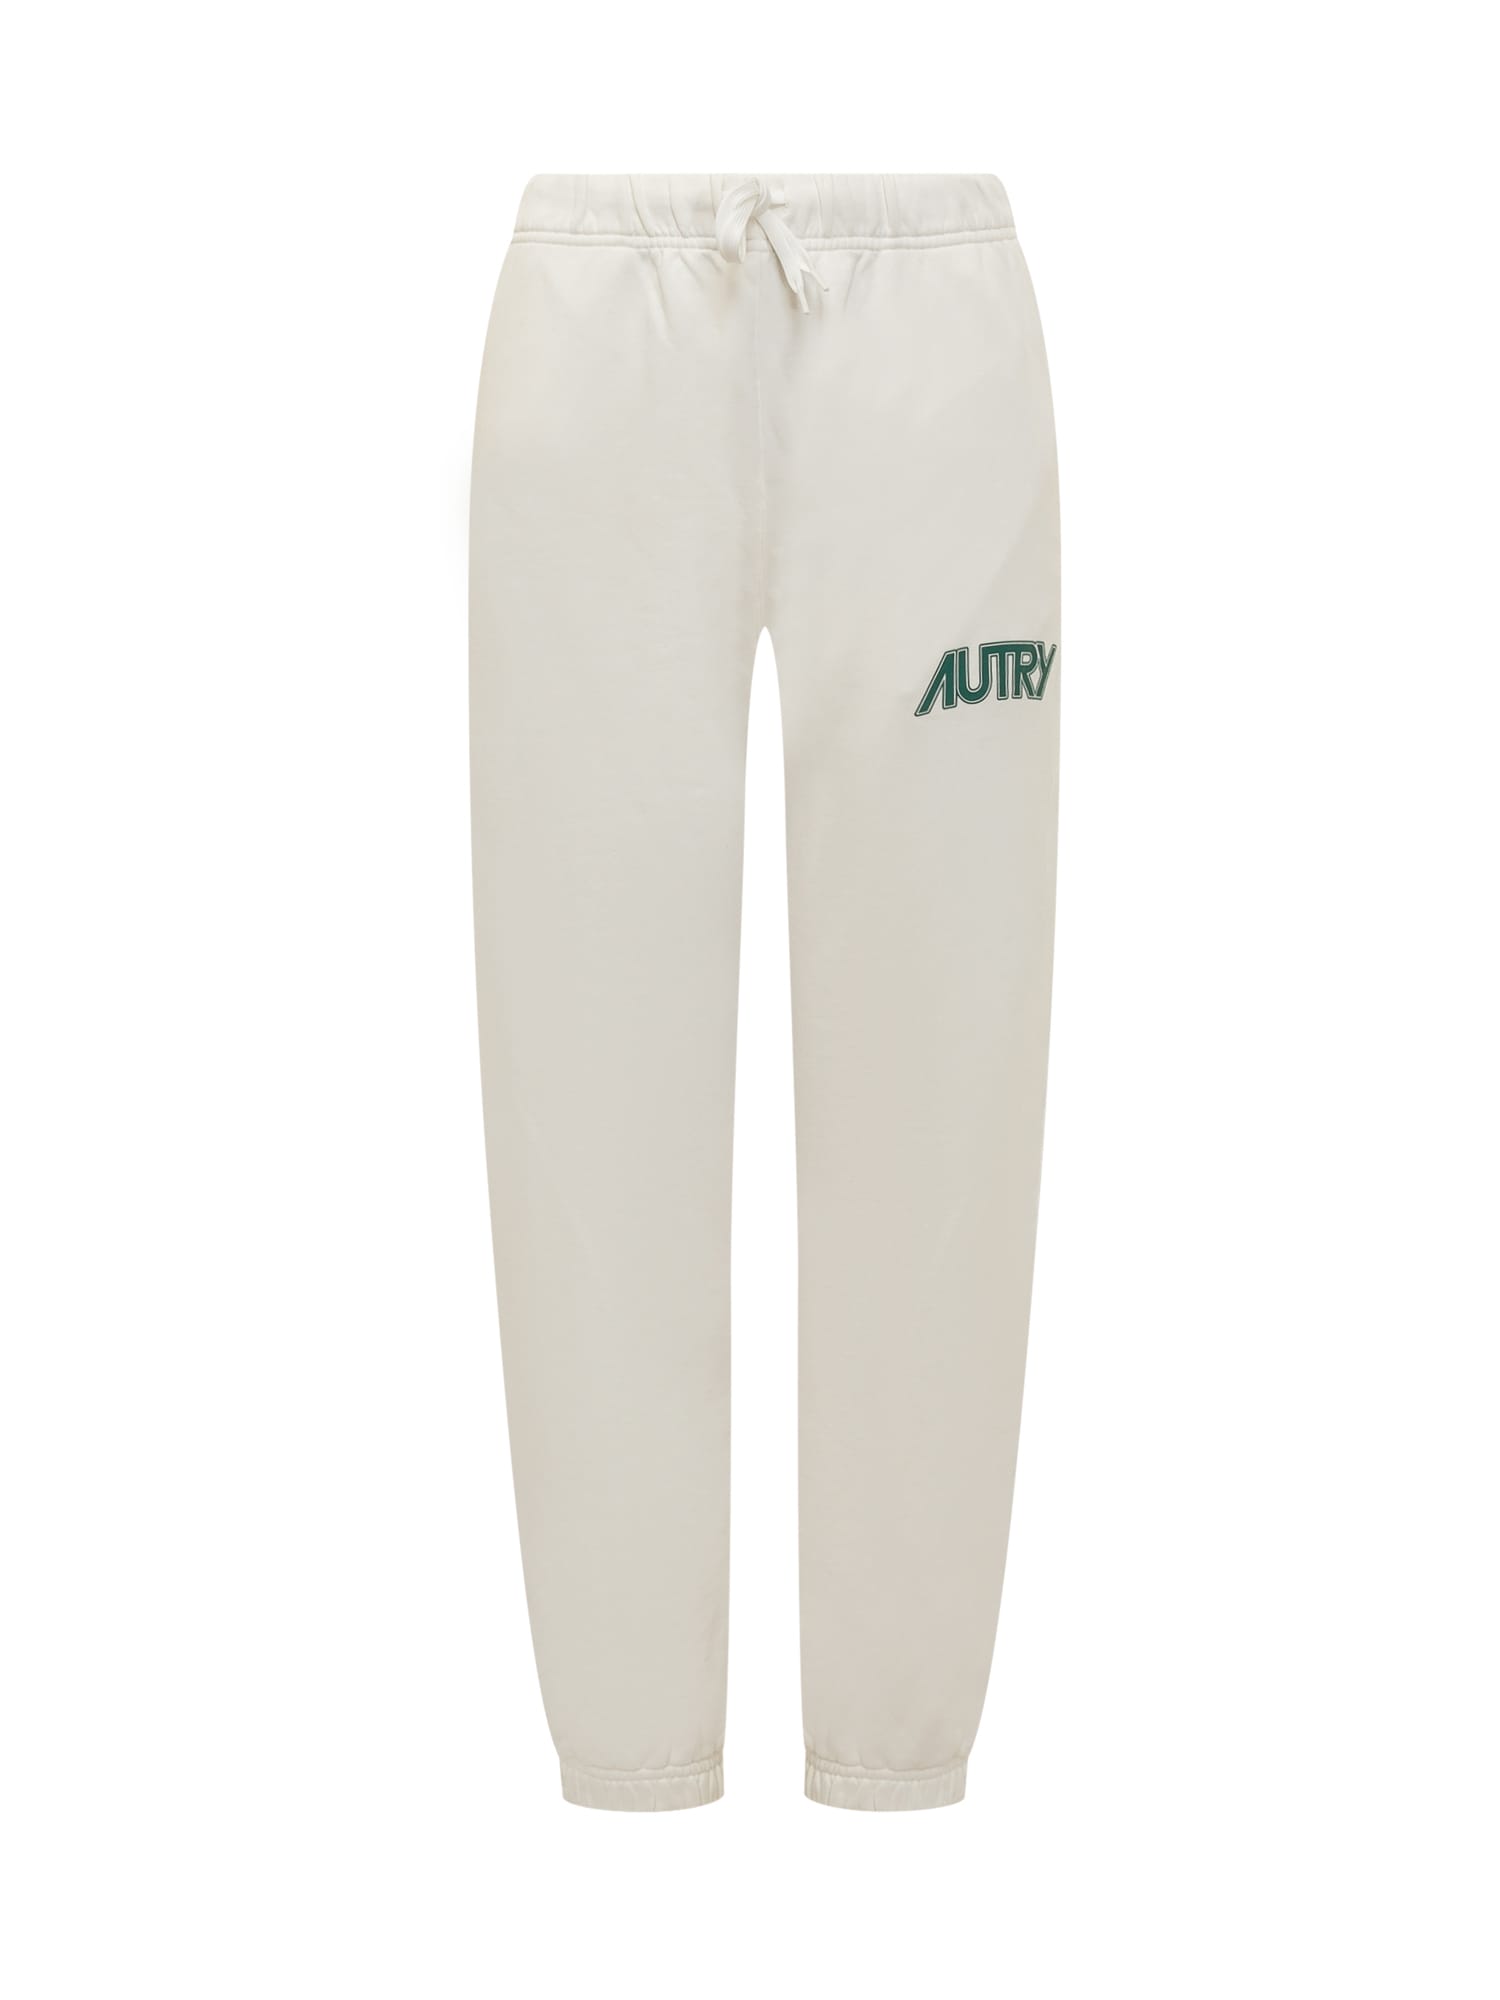 Autry Pants With Logo In Ivory